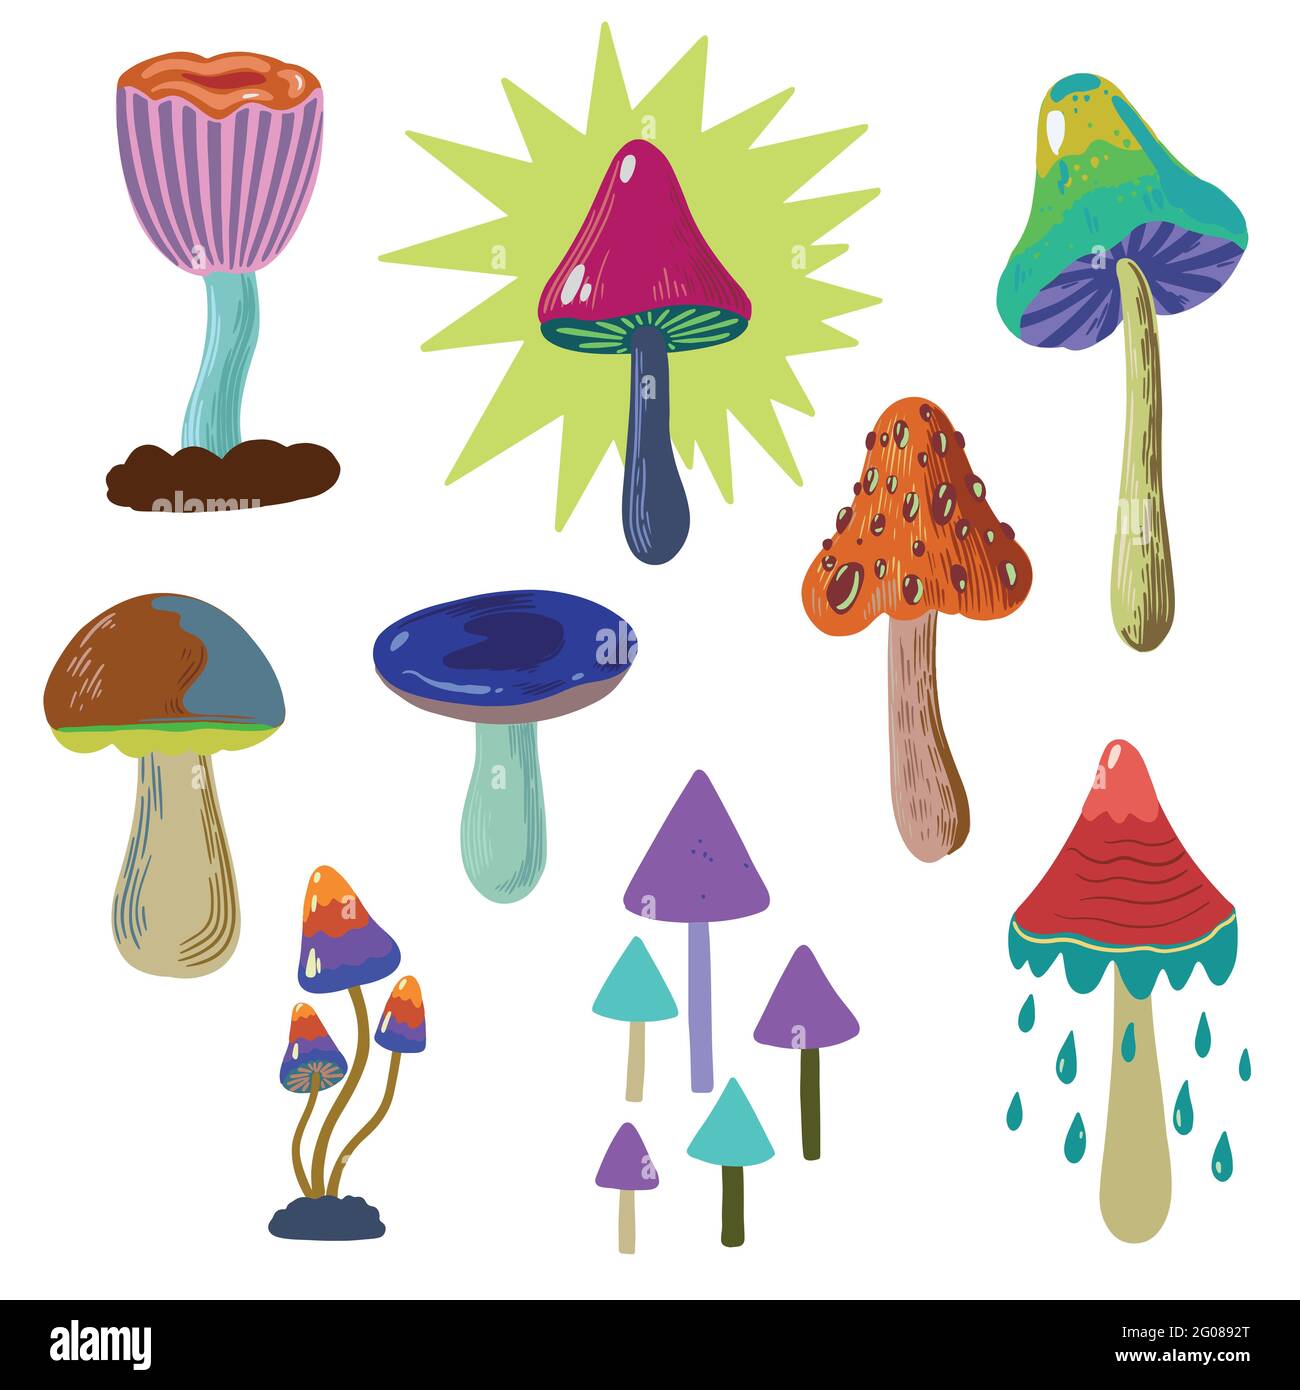 Set of psychedelic and fairy colorful mushrooms isolated on white background. Vector hand drawn illustration. Stock Vector